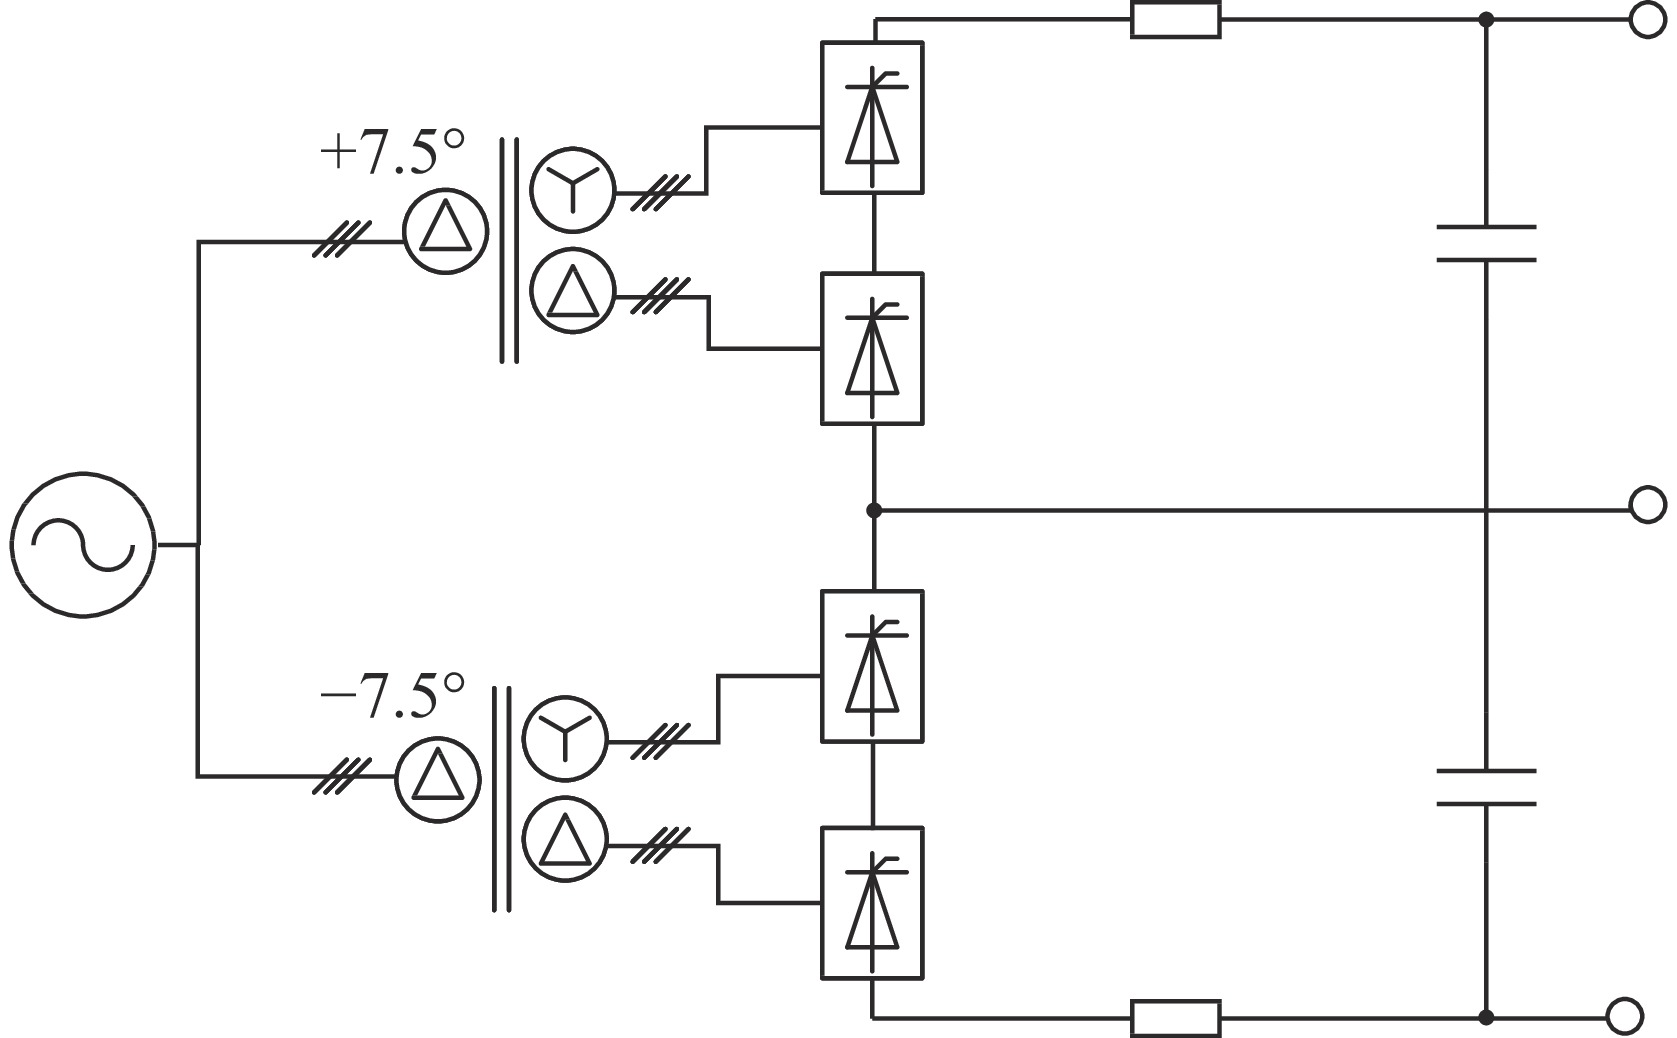 Main control circuit schematic diagram of twenty-four pulse phase-controlled rectifier unit